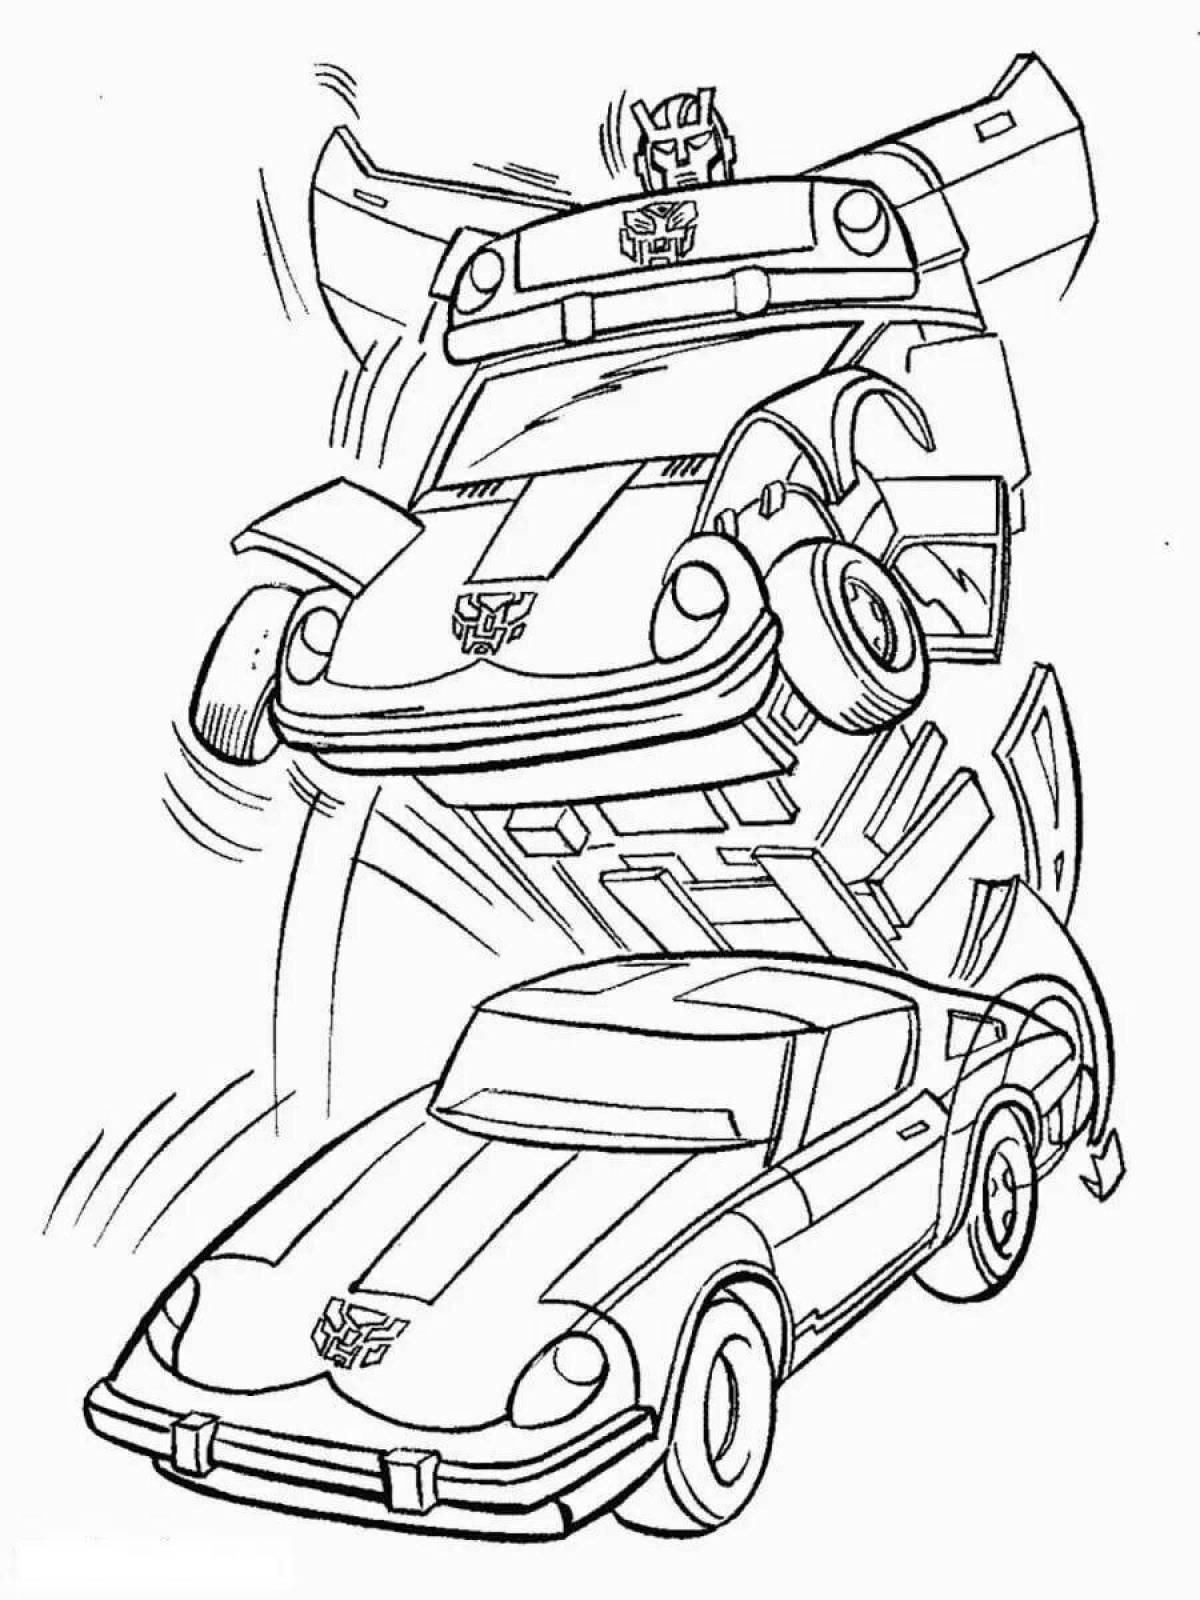 Amazing transforming cars coloring page